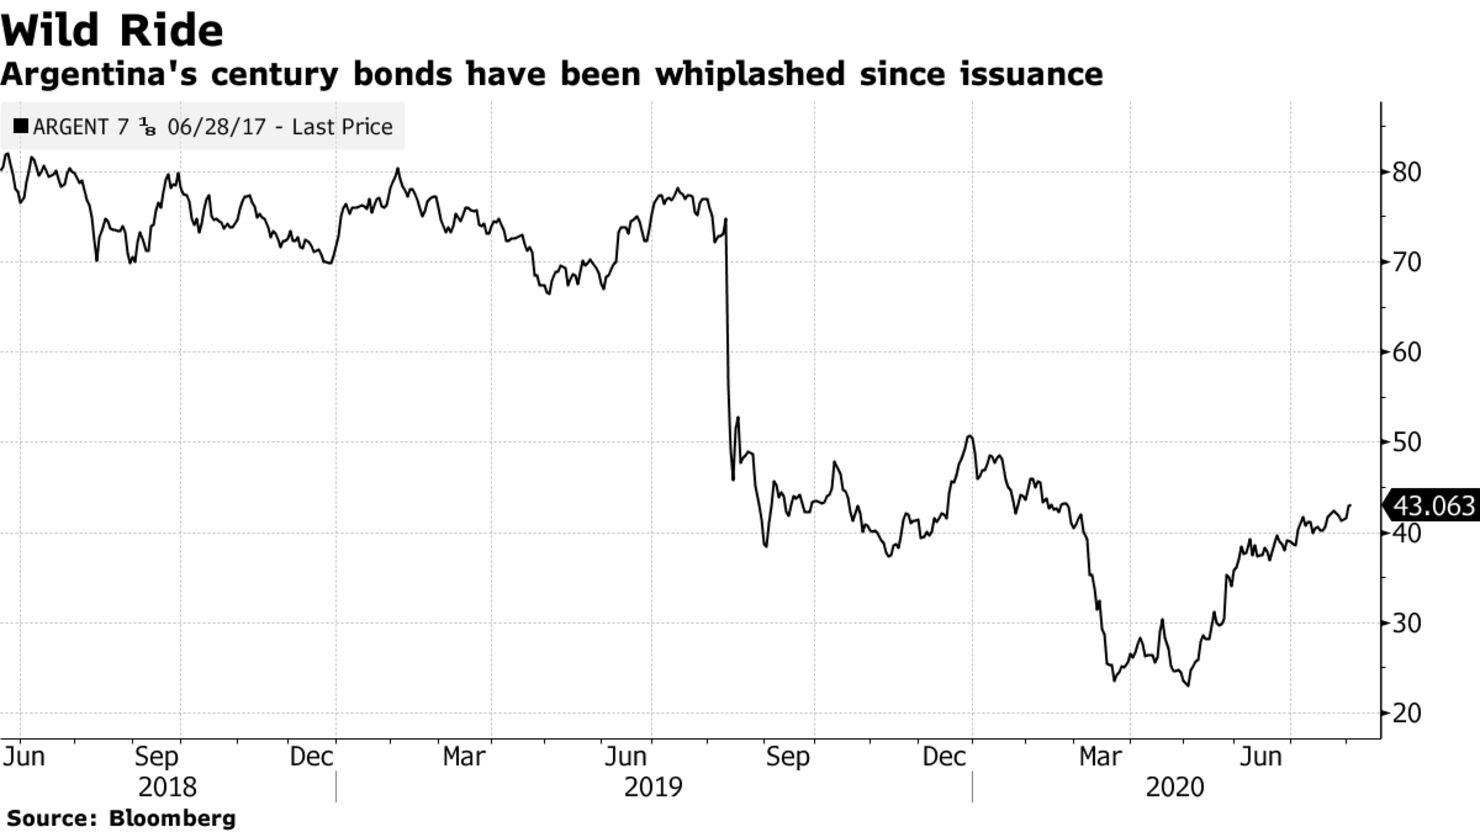 Argentina's century bonds have been whiplashed since issuance